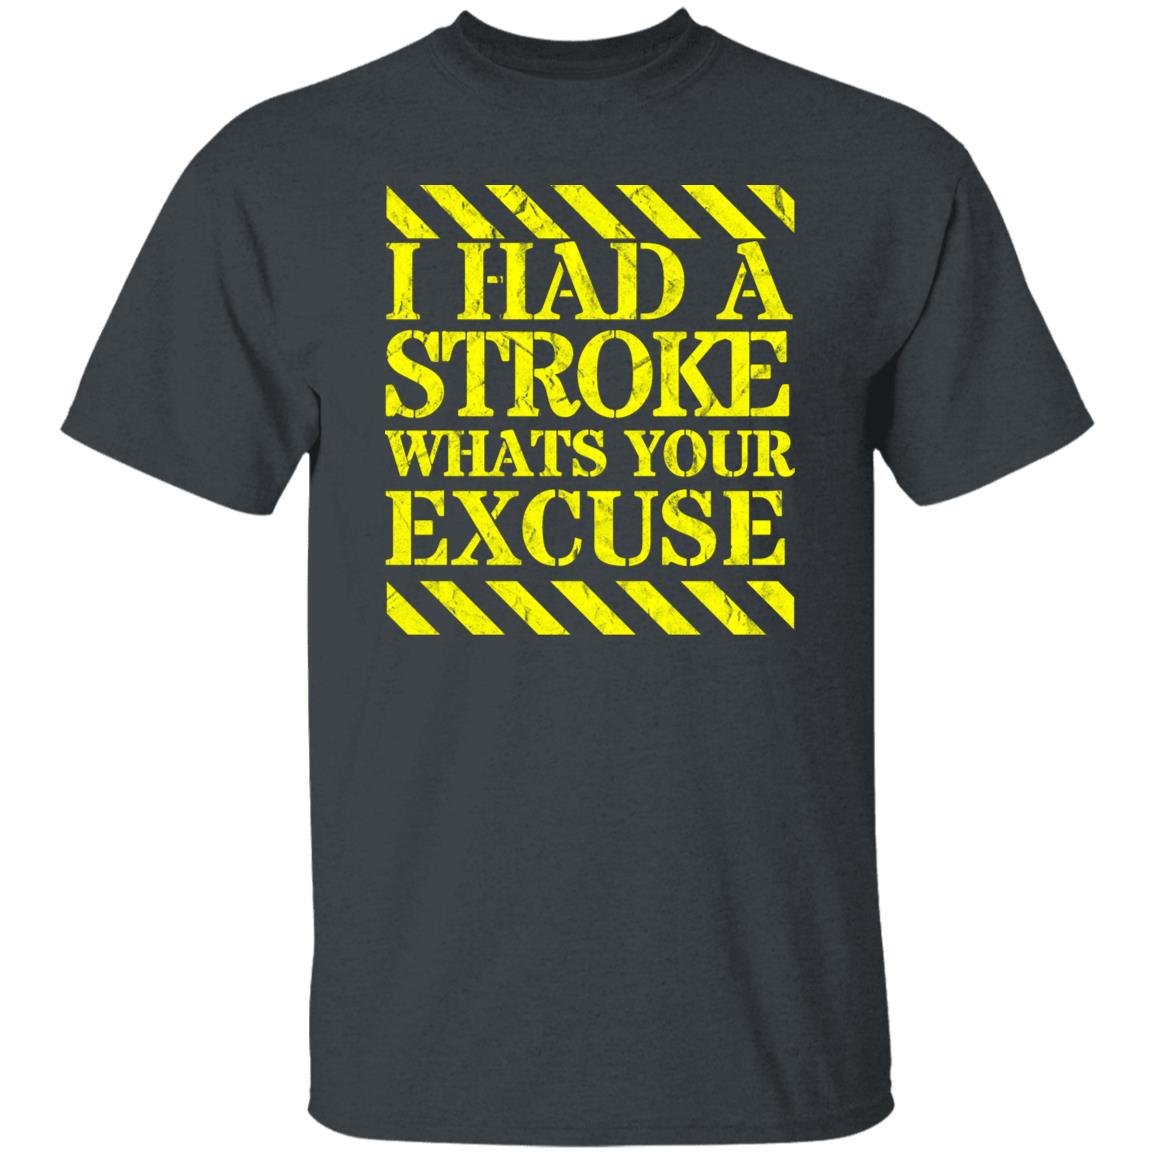 I had a stroke what's your excuse T-Shirt Yellow - Expressive DeZien 